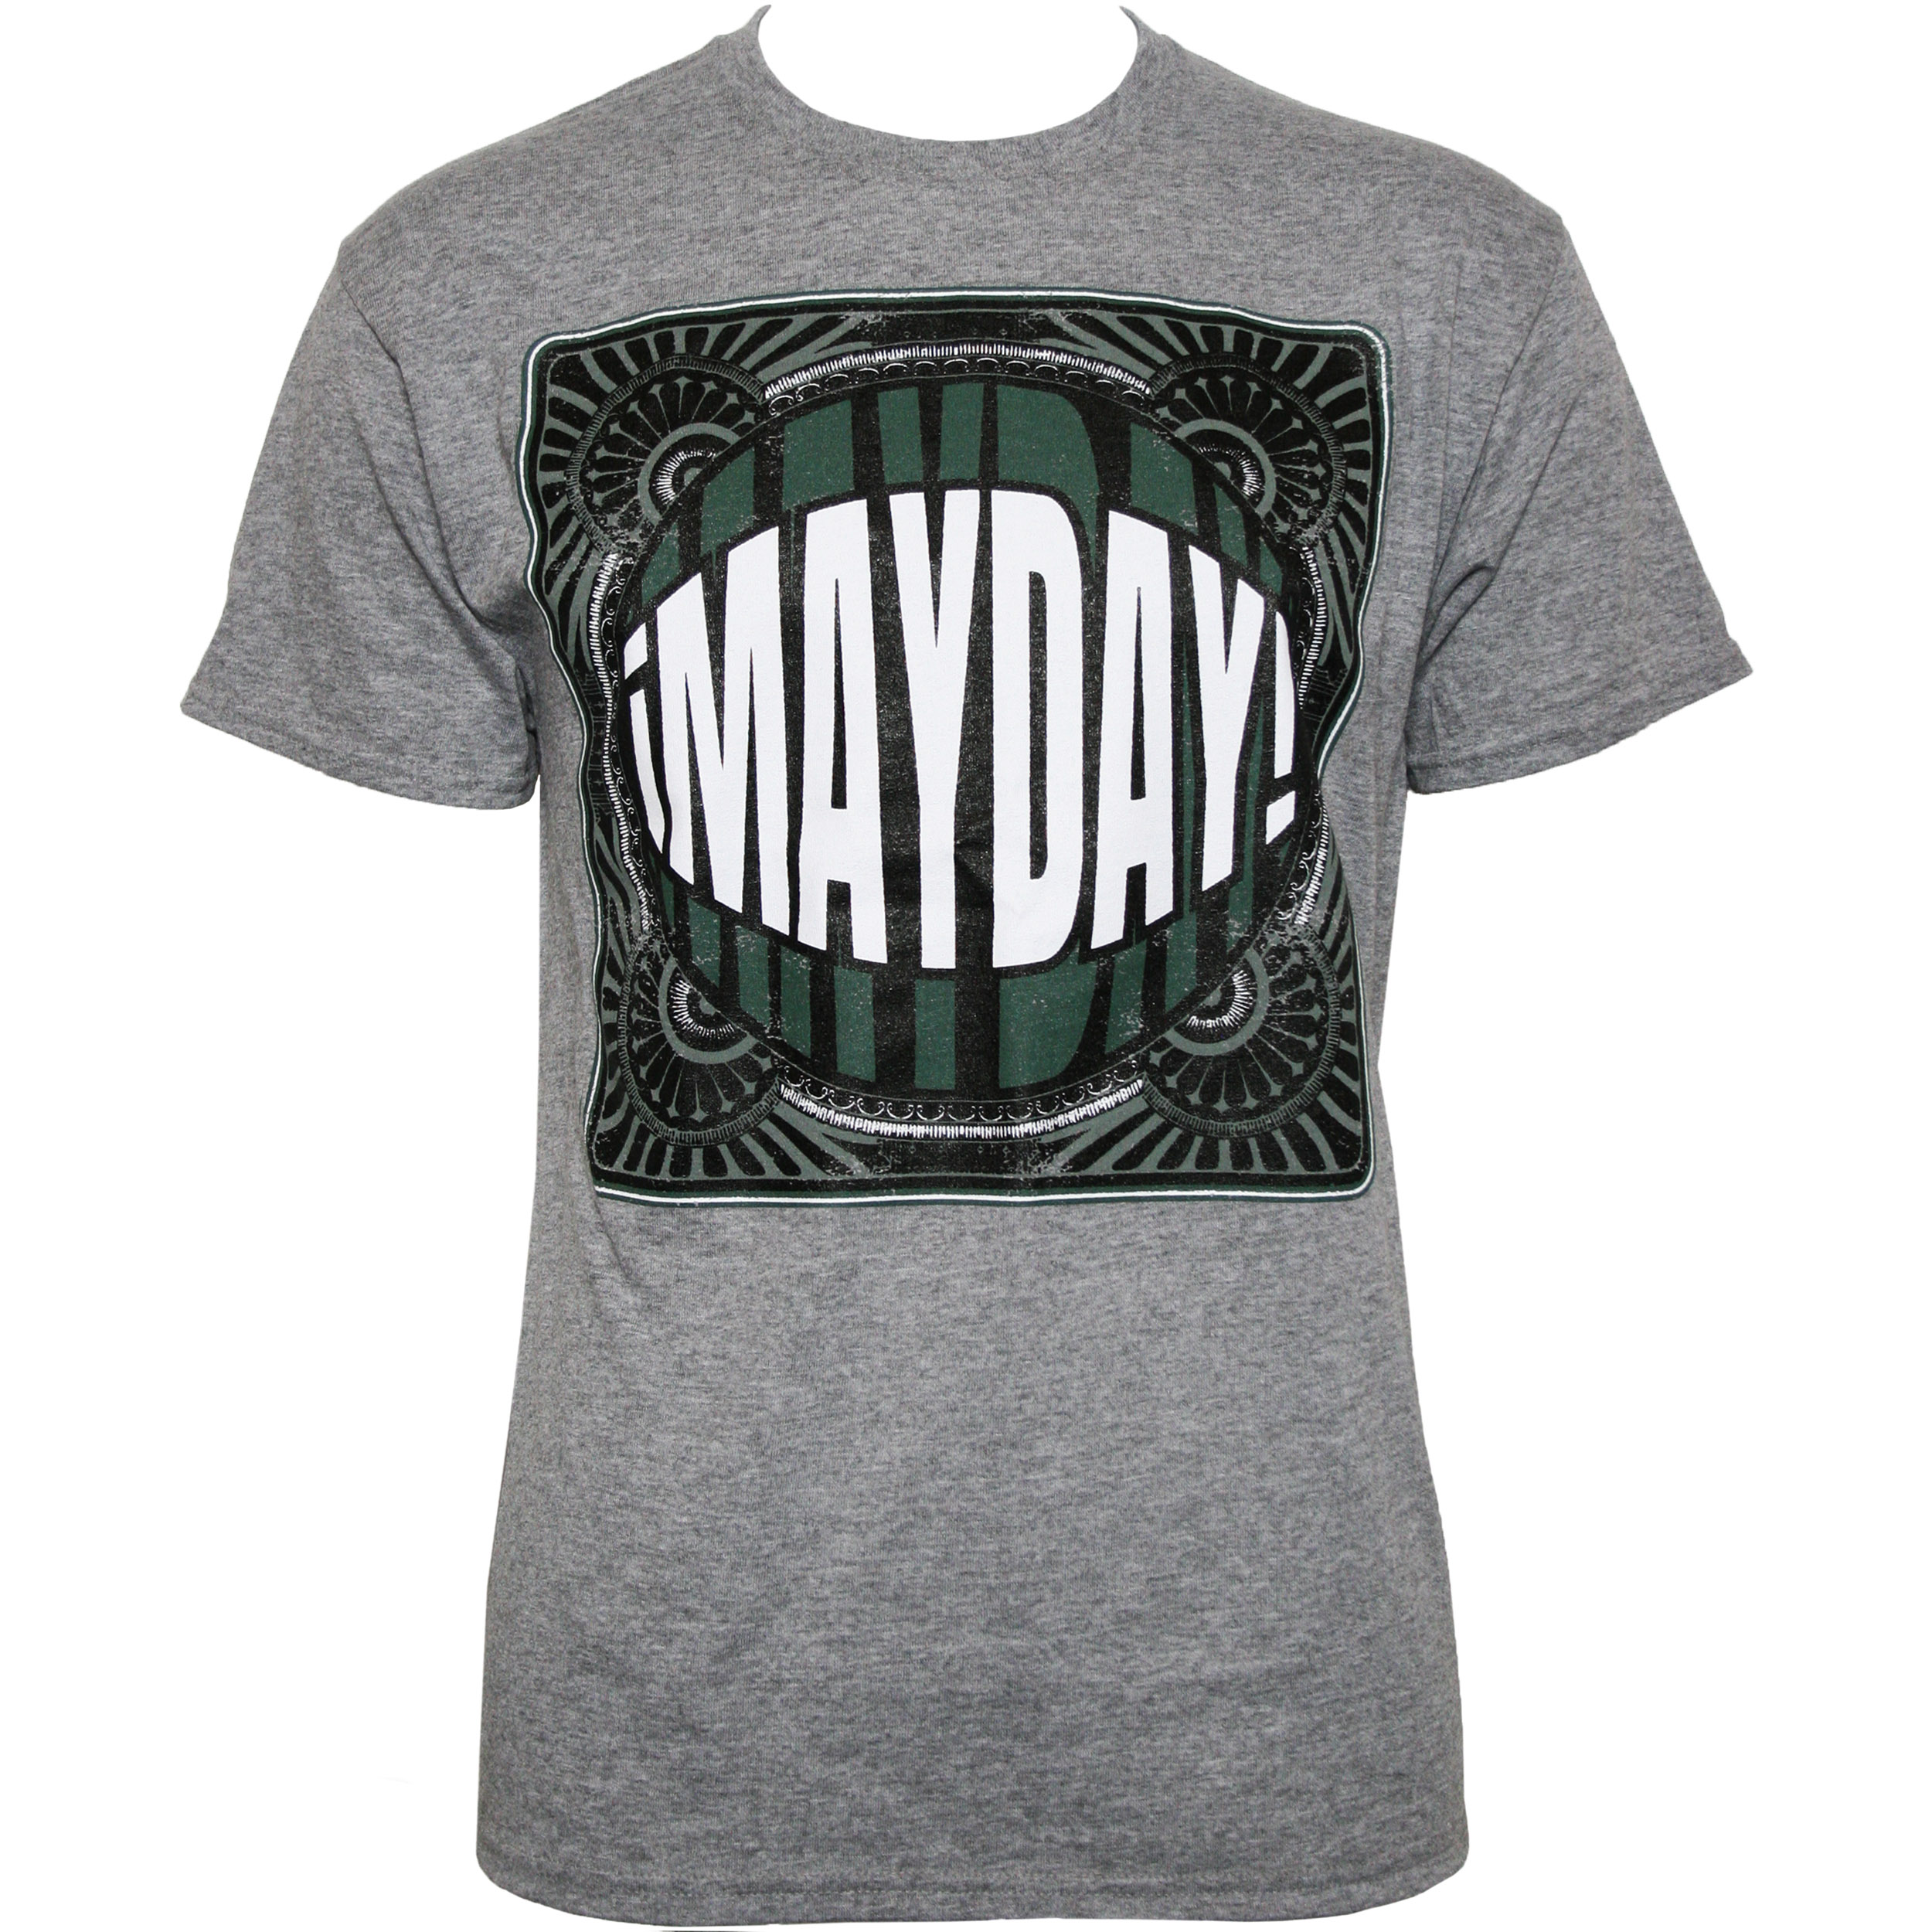 ¡MAYDAY! - Oxford Open Mind T-Shirt